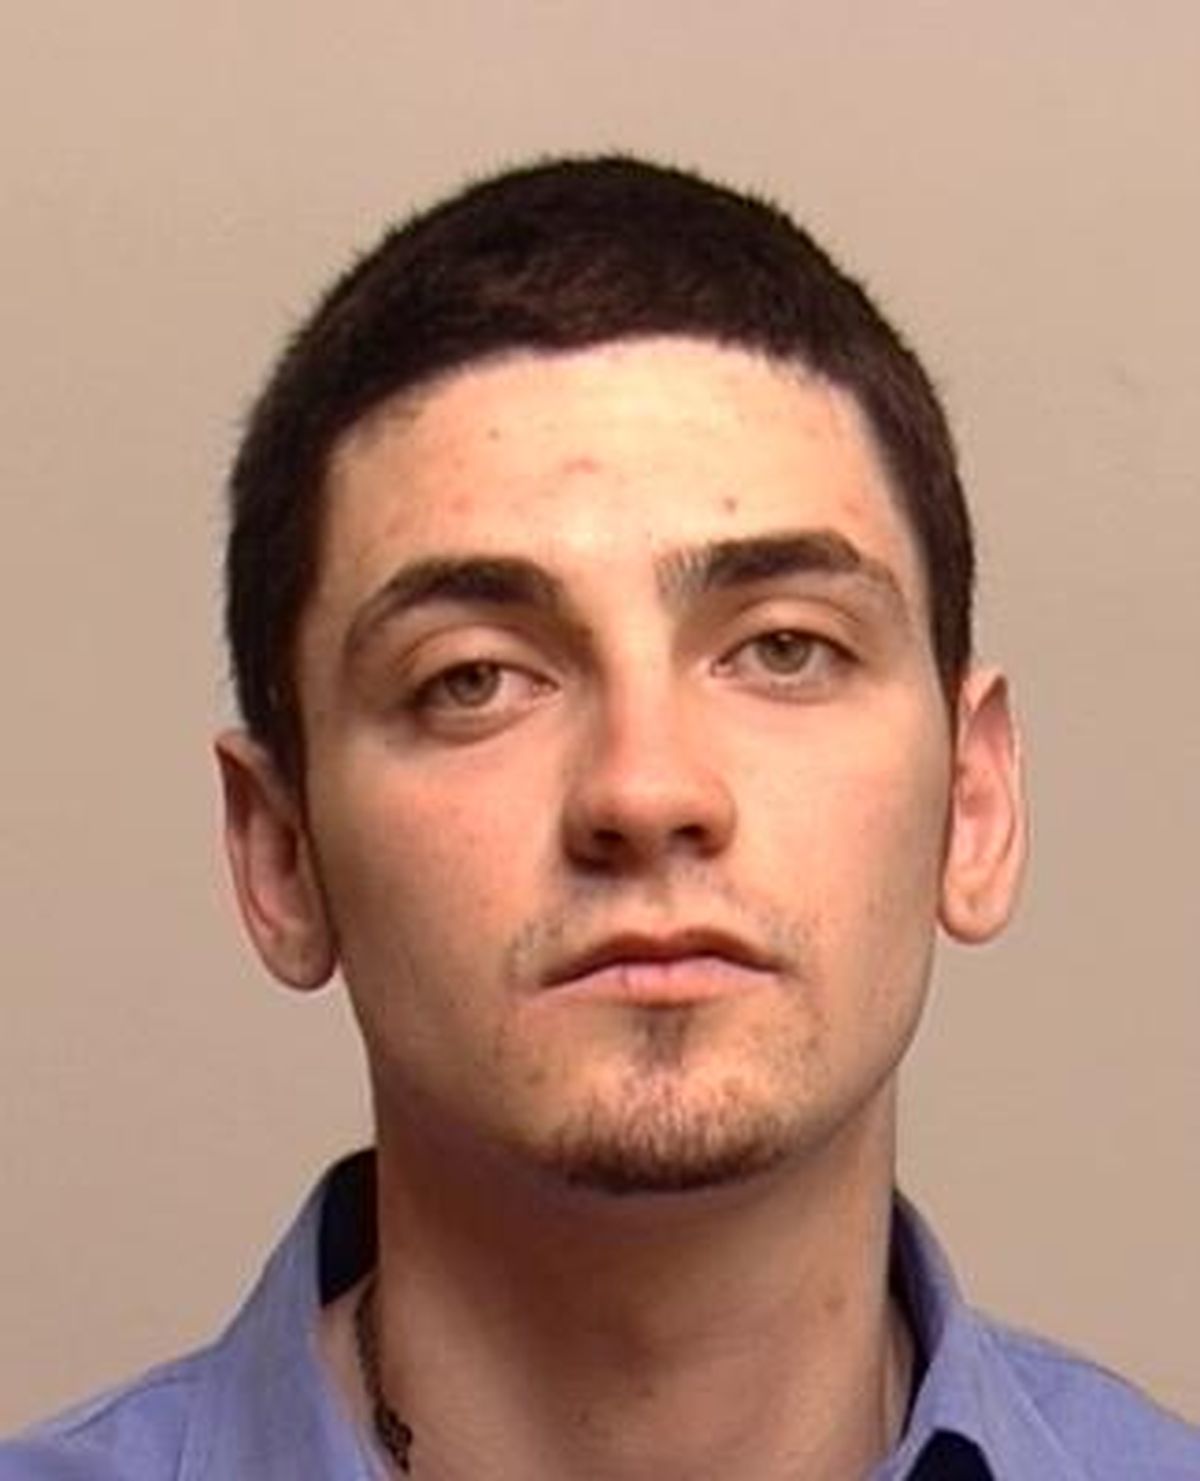 Anthony D. Barton, 20, is wanted for second-degree burglary. (Spokane Police Department)